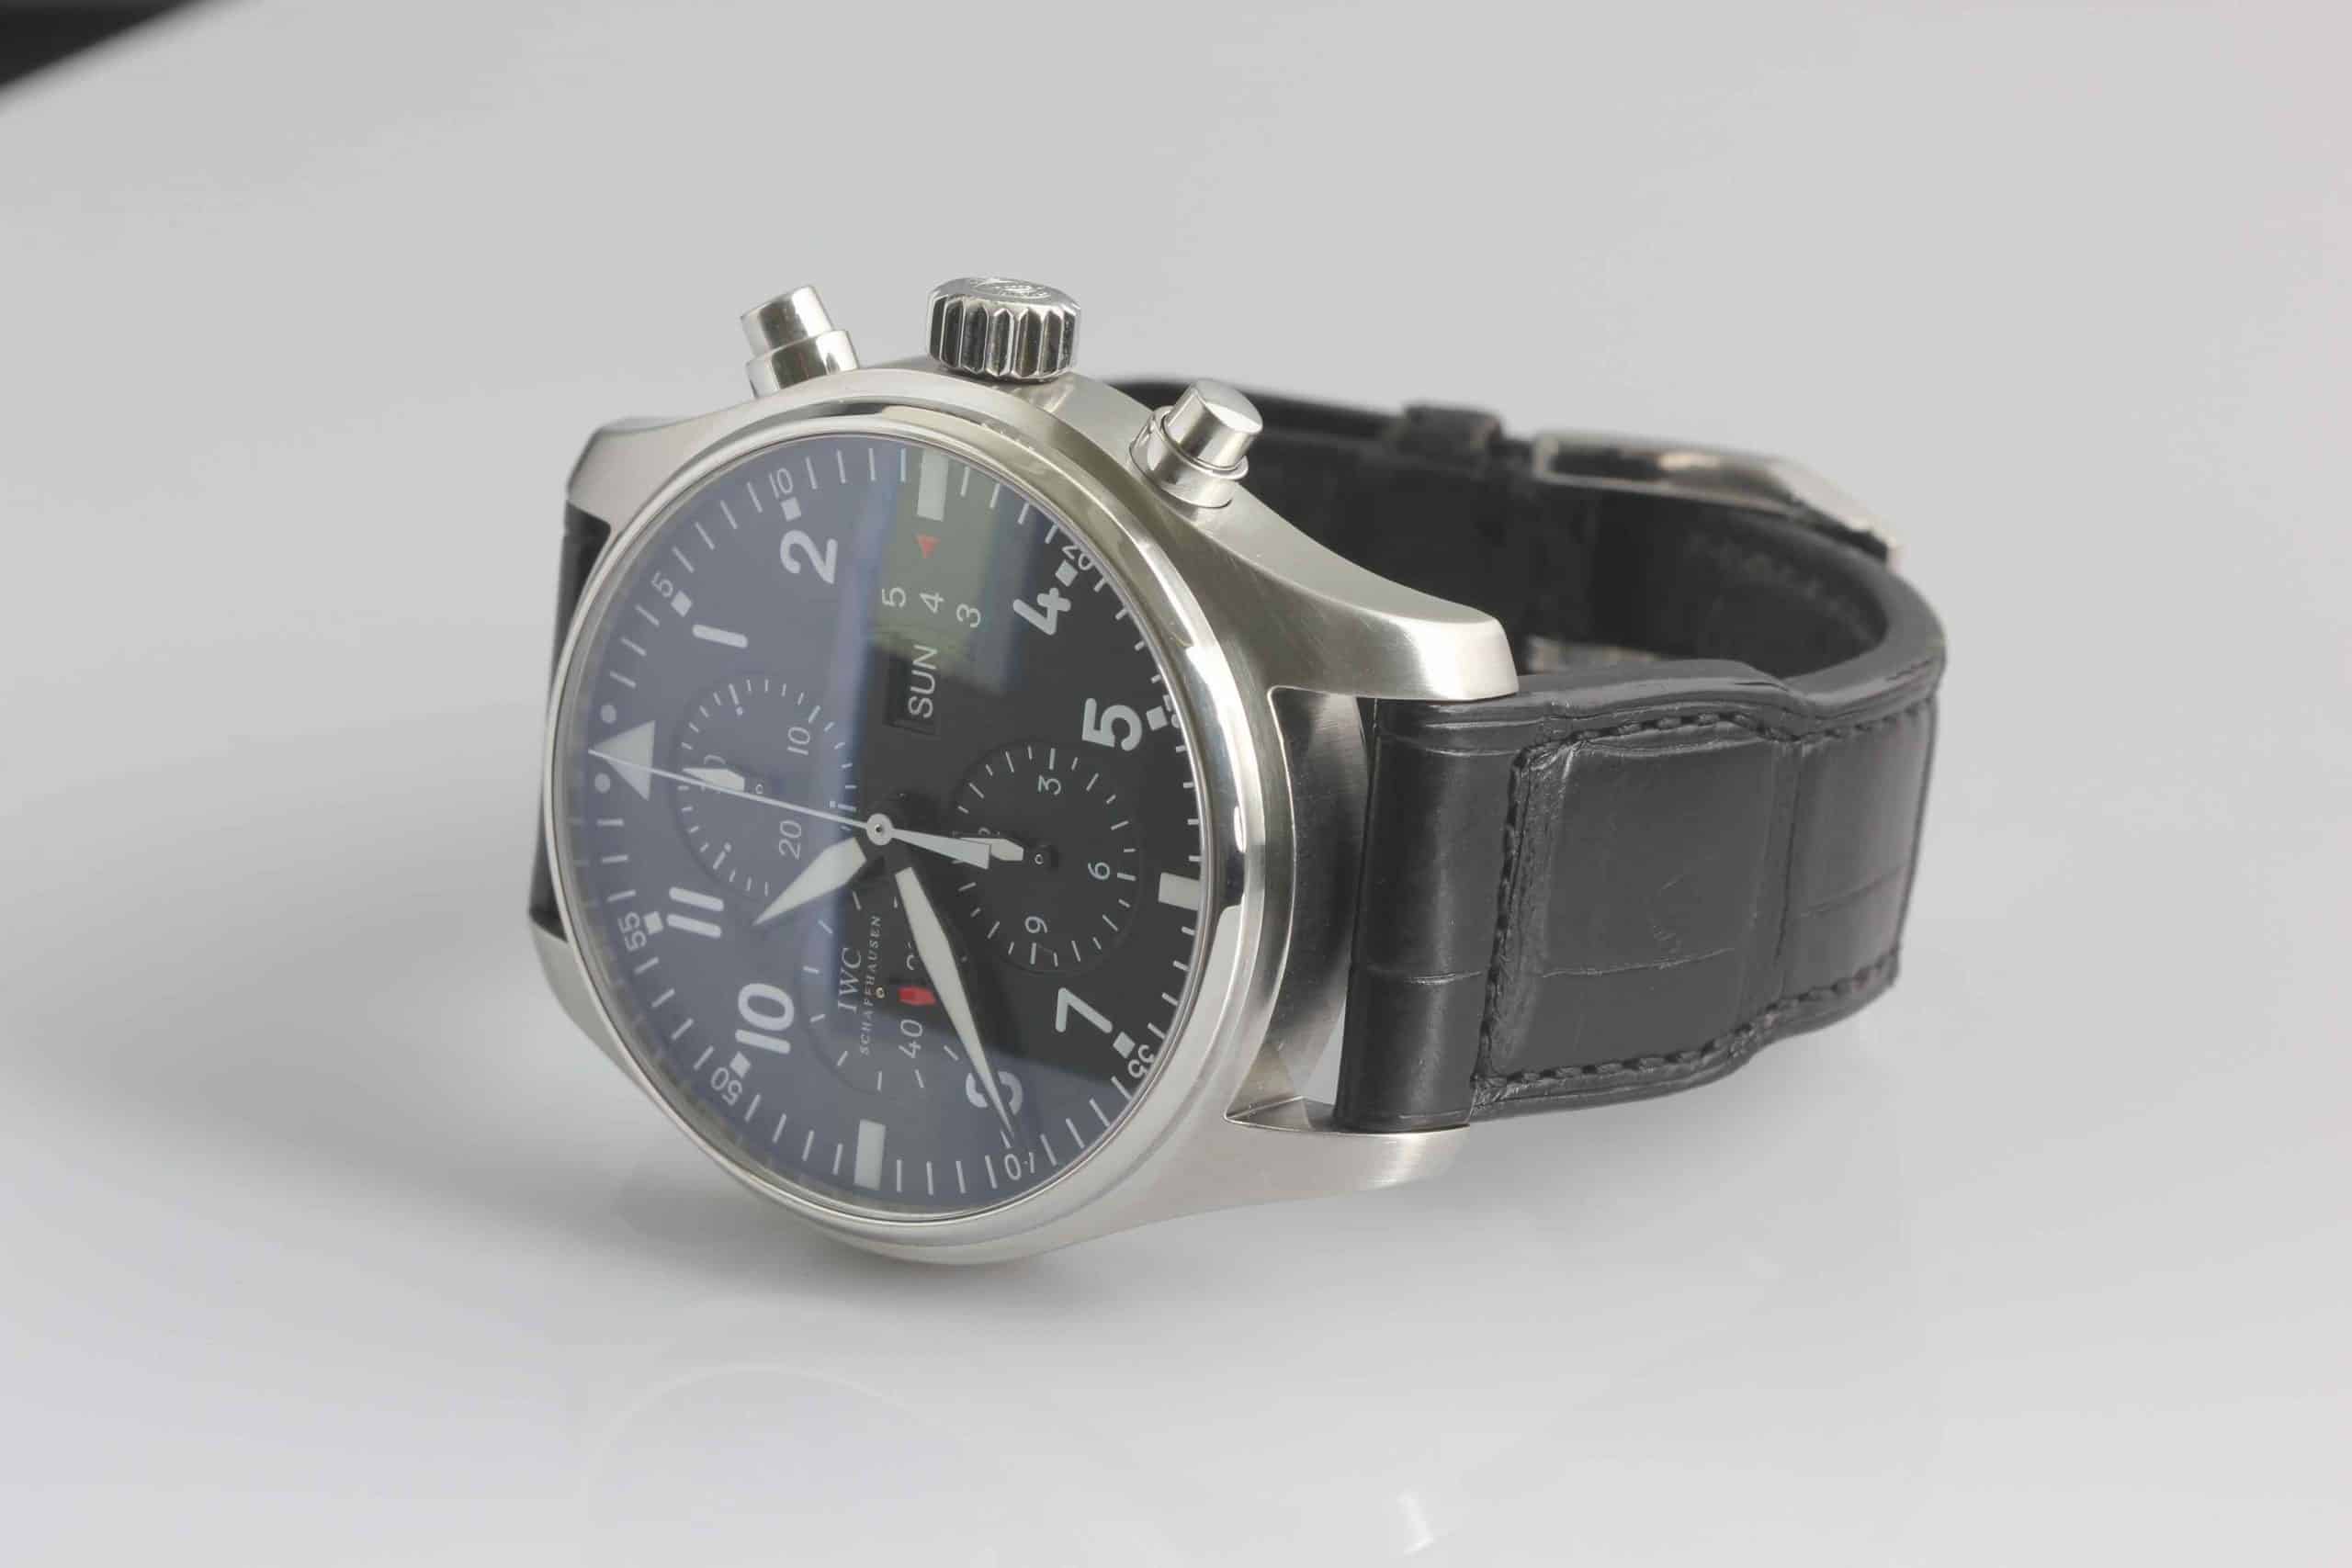 IWC Pilot Chronograph - Triple Date - Reference 3777-01 - SOLD - Watch ...